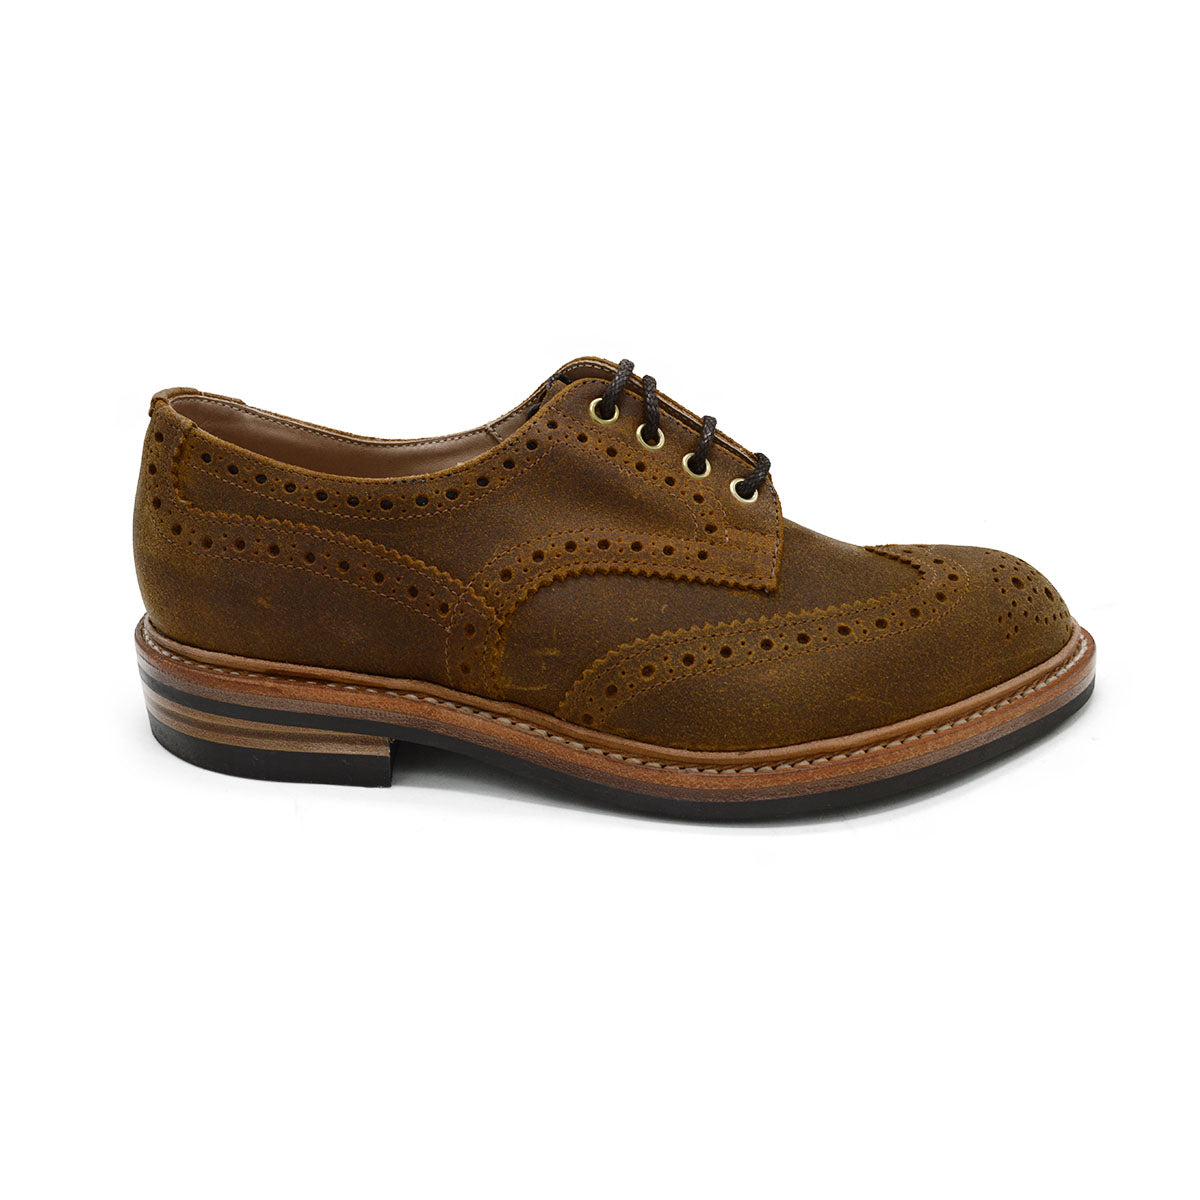 Trickers Bourton - Cuba Waxy Commander – A Fine Pair of Shoes